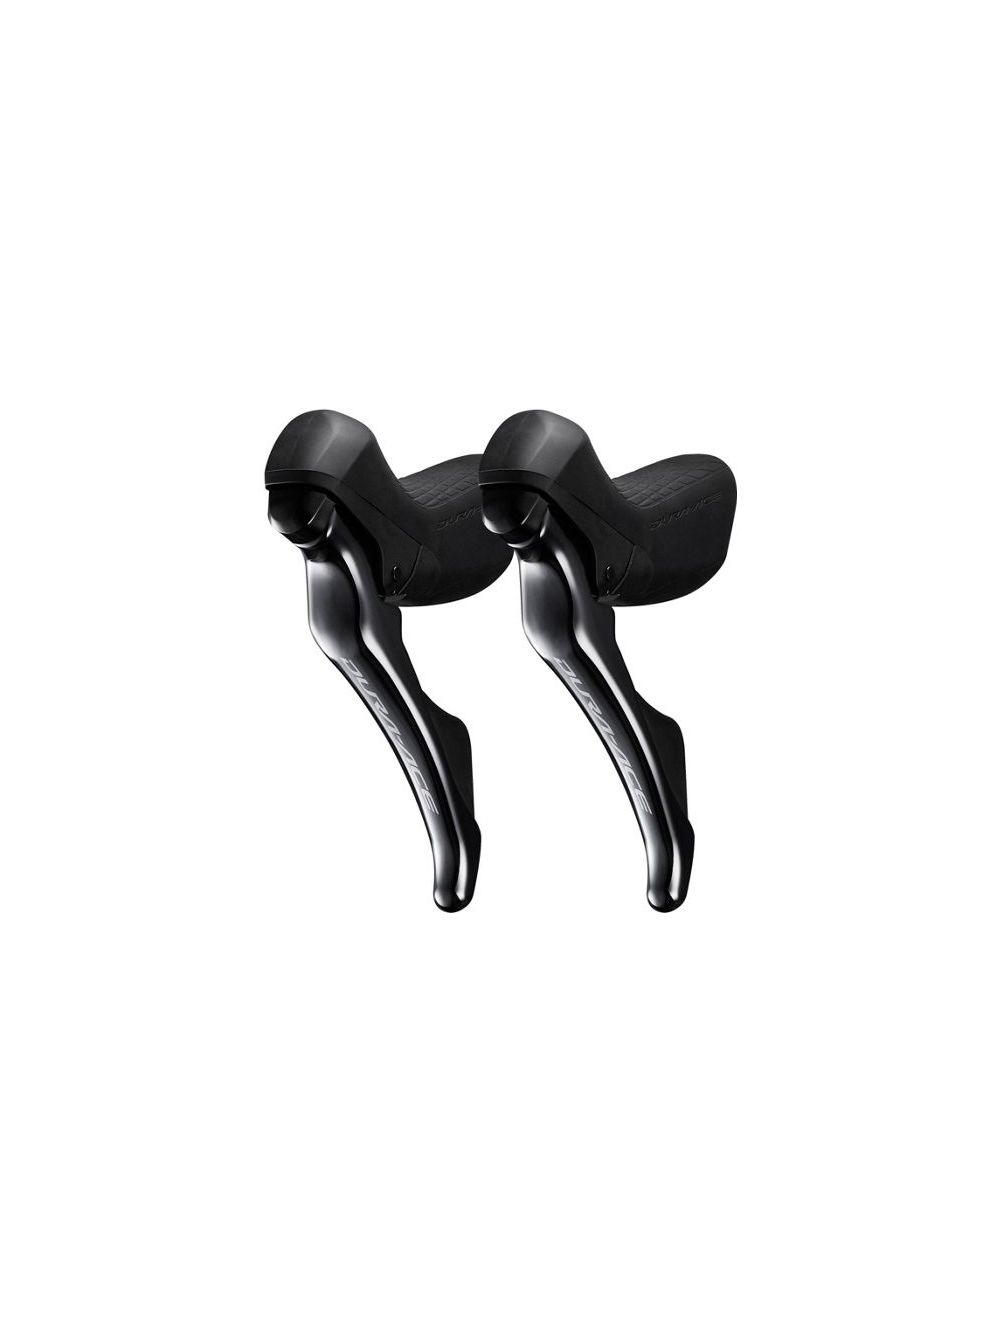 dura ace 9100 shifters